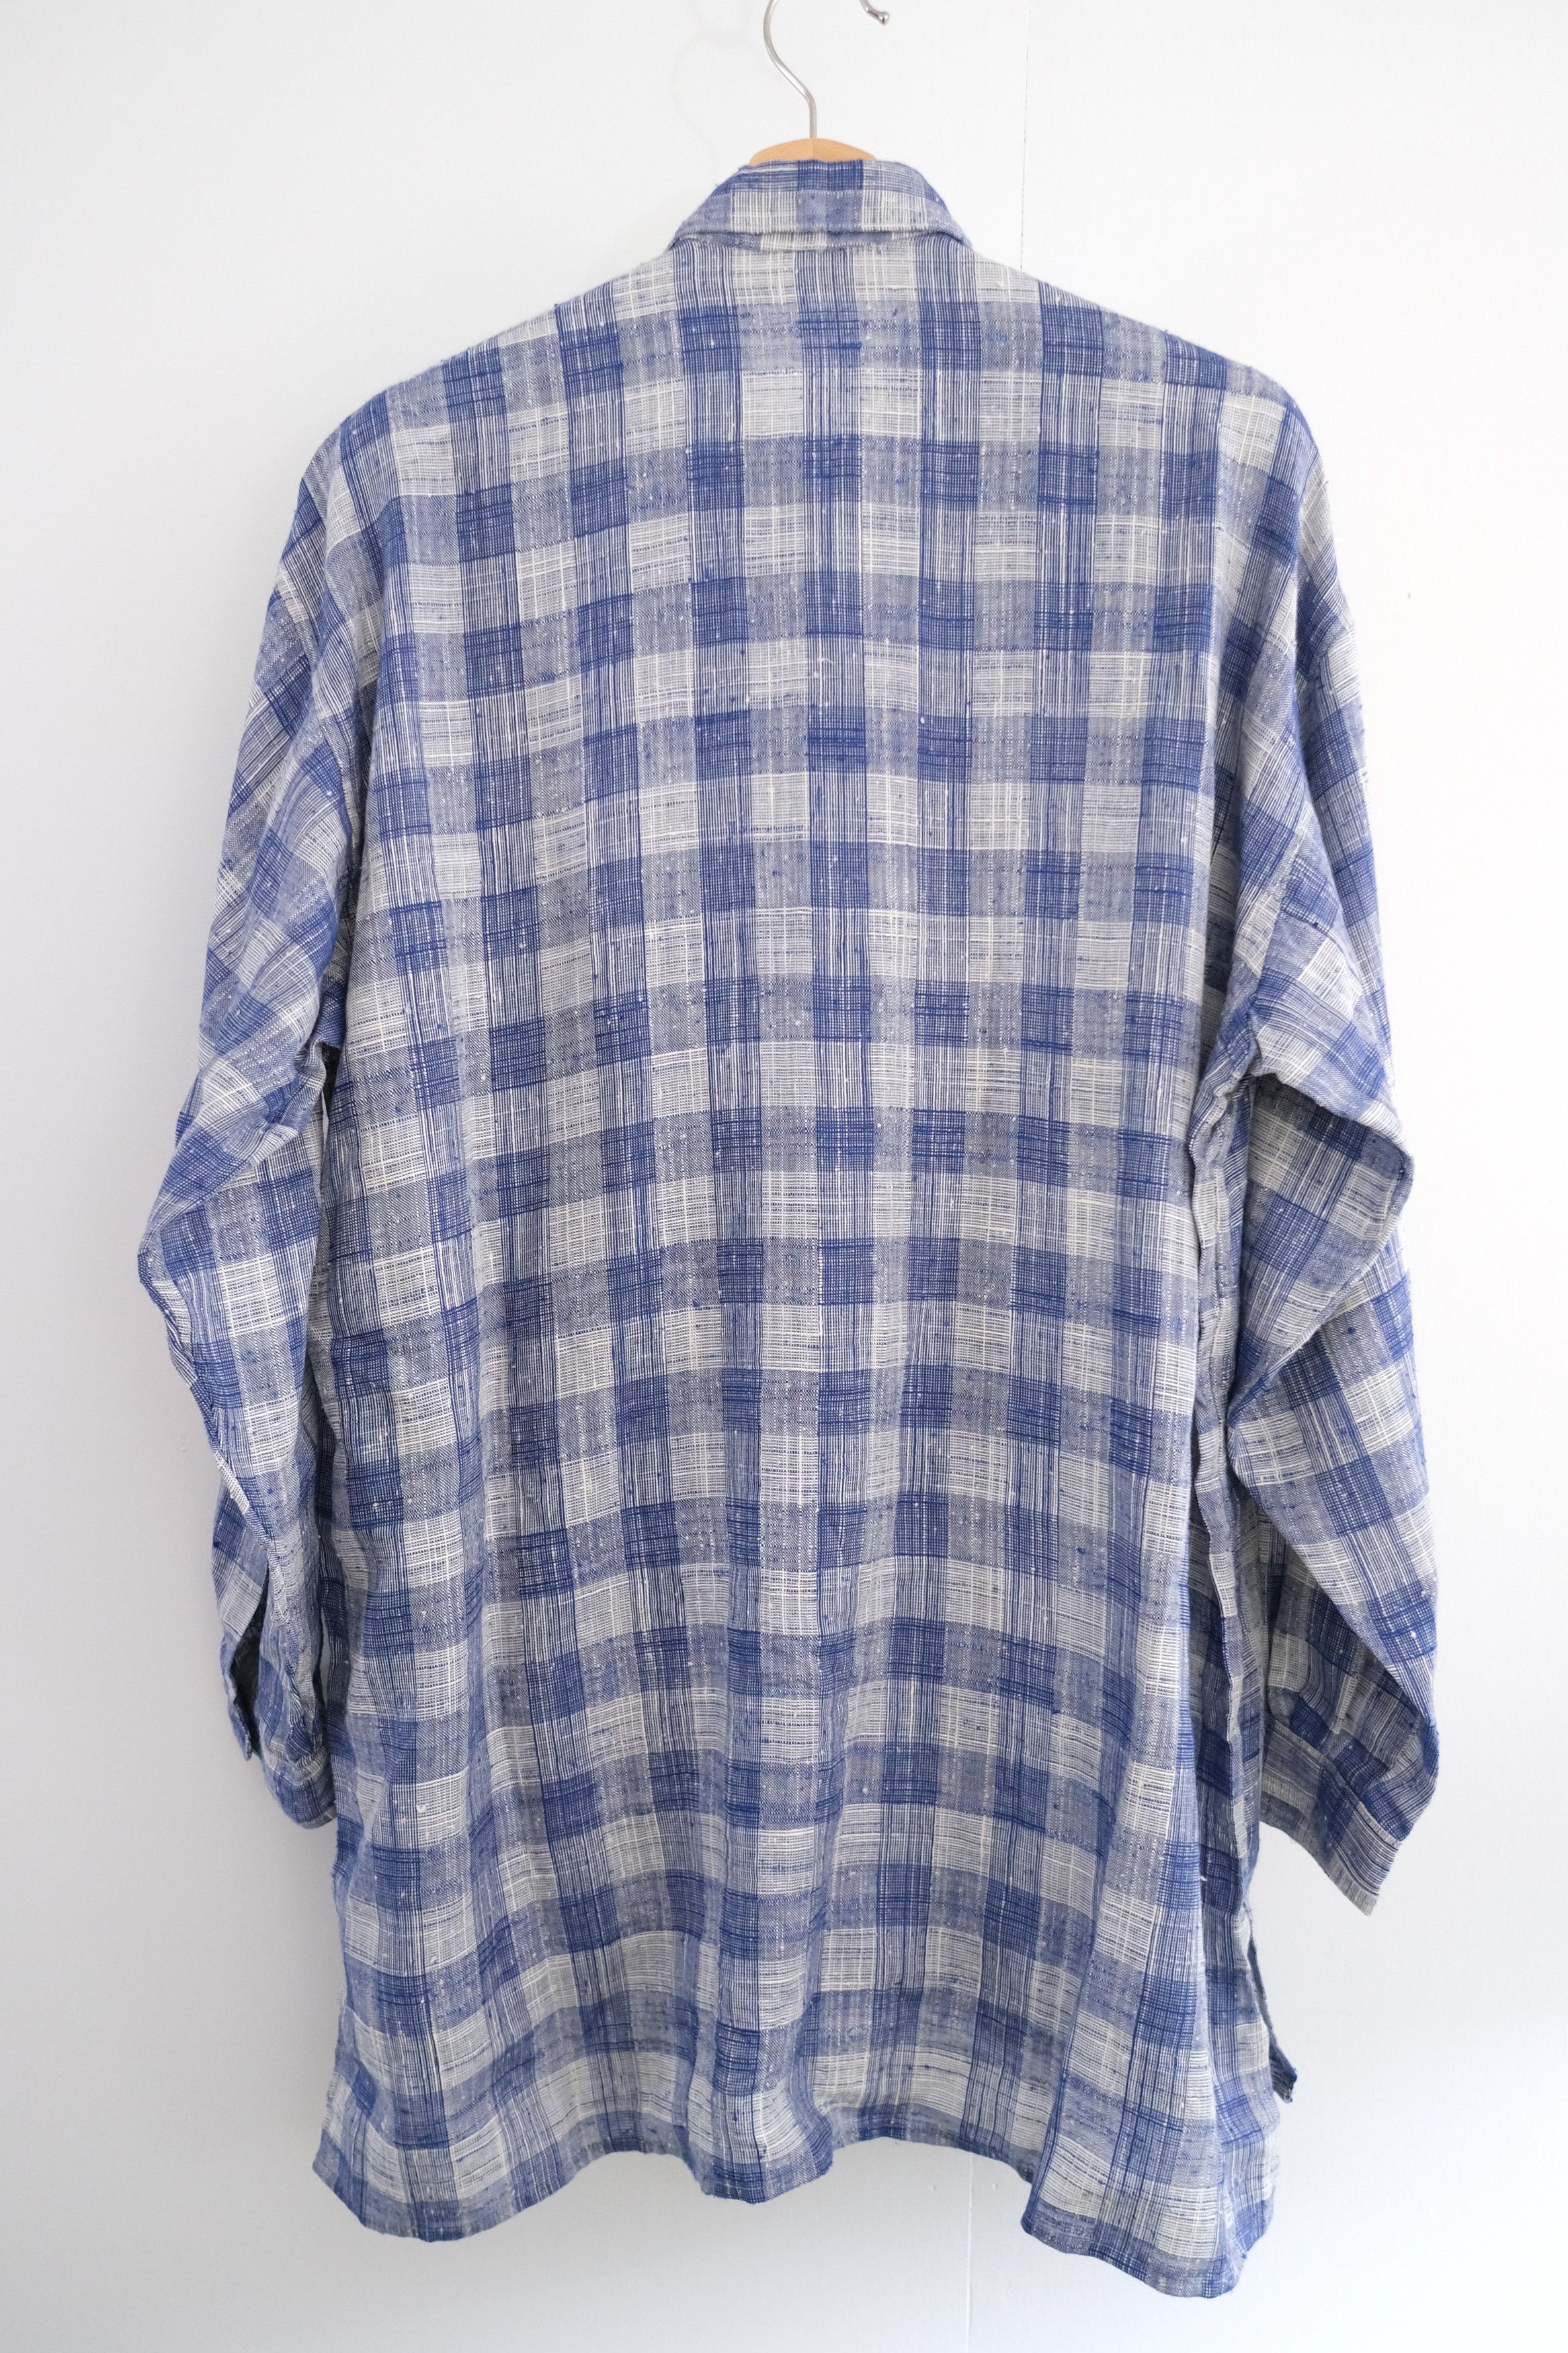 *SOLD* 🎐 YFM Archive [1970s-80s] Textured Plaid Shirt - 12